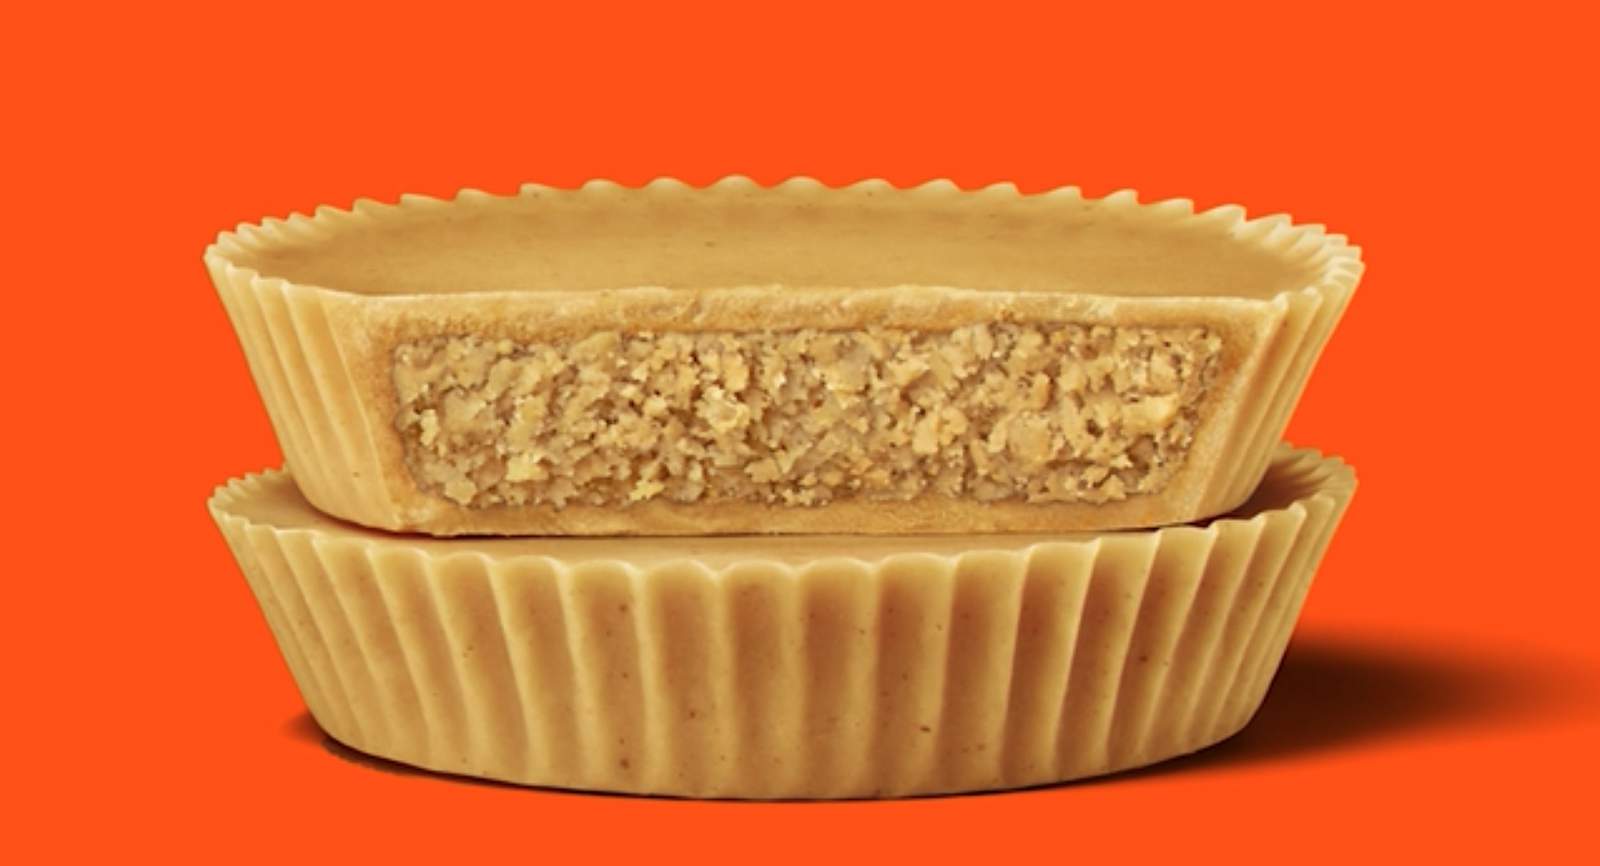 Reese’s unveiling chocolate-free peanut butter cups in April